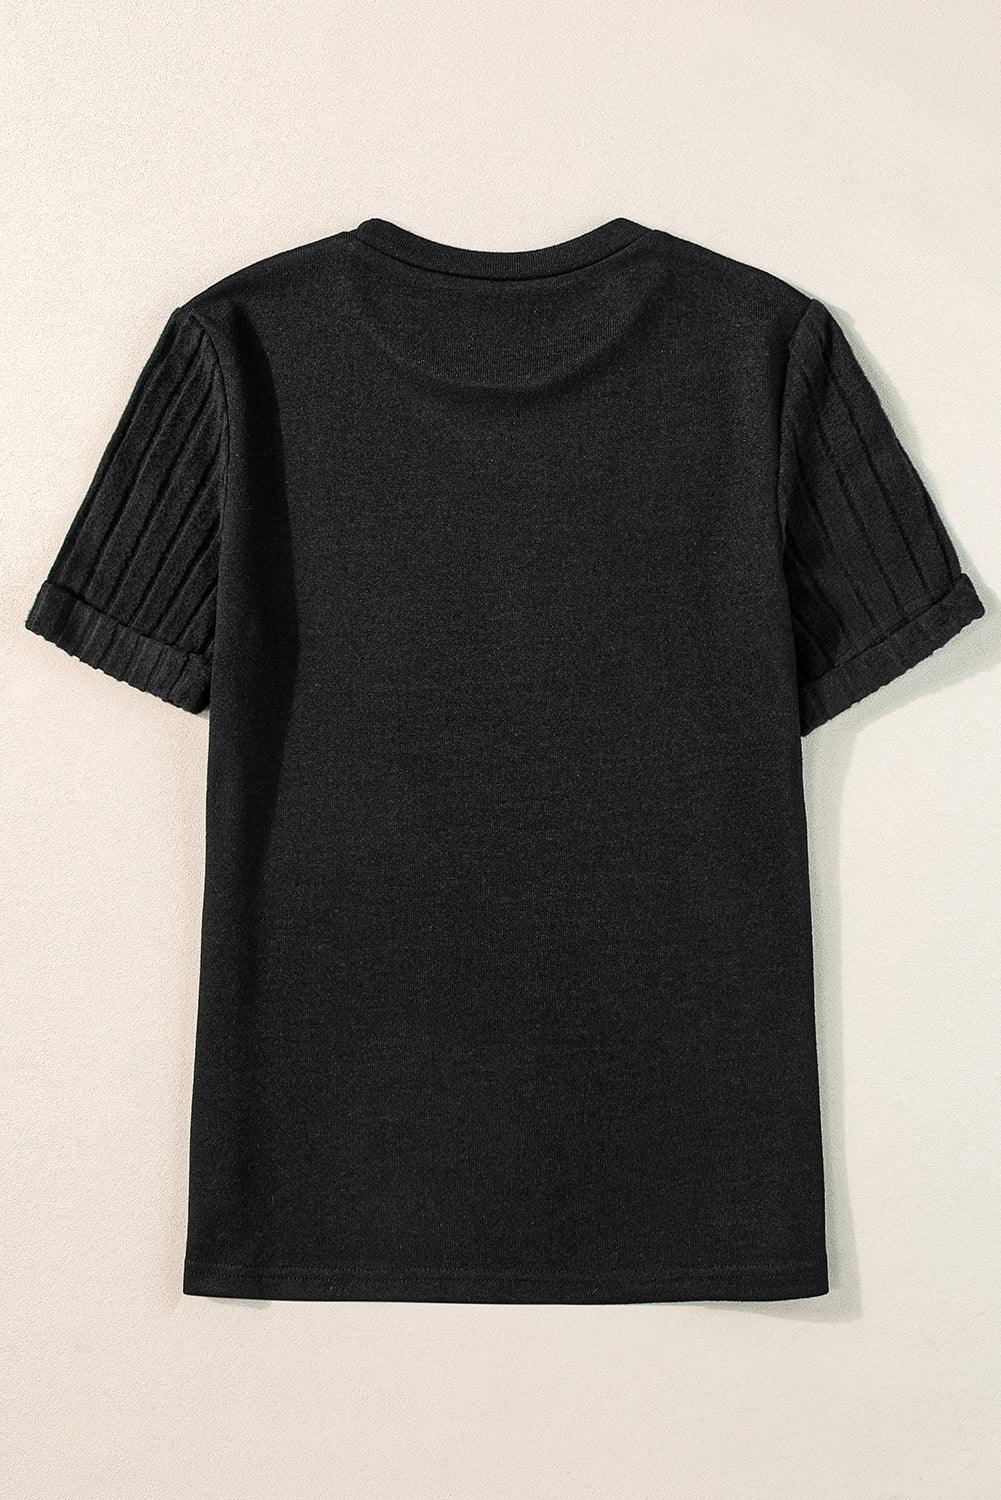 Black Ribbed Splicing Sleeve Round Neck T-shirt for Women